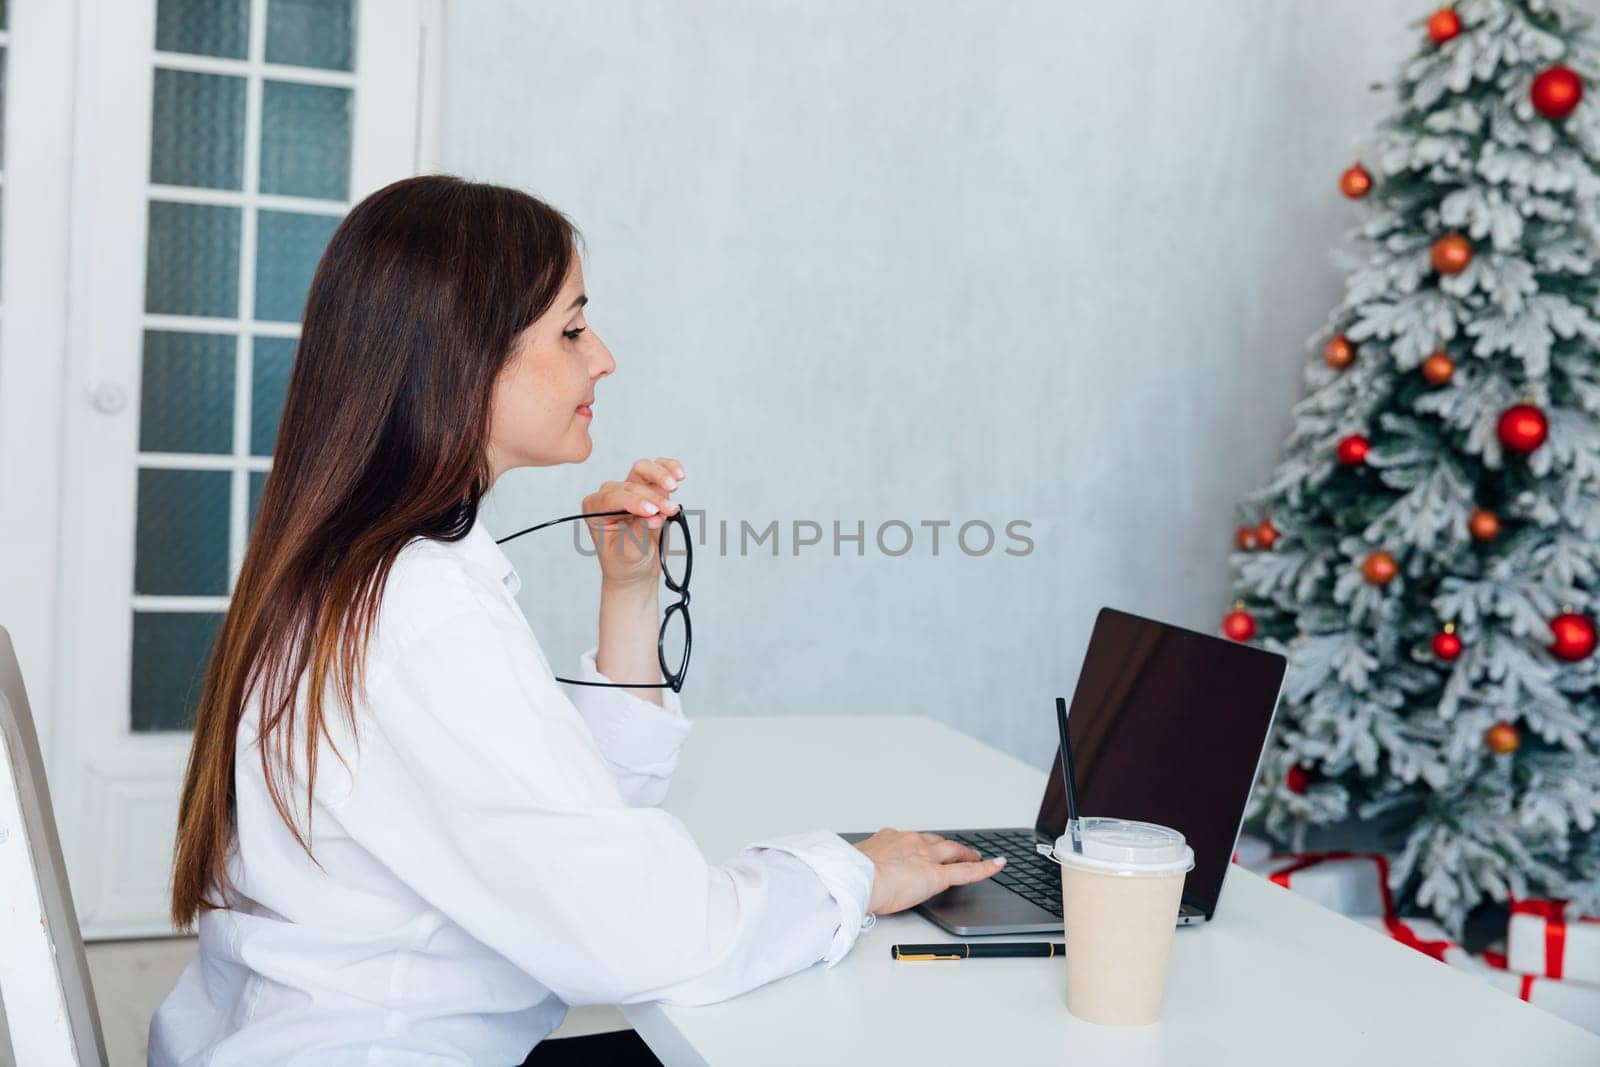 woman working on laptop at christmas tree